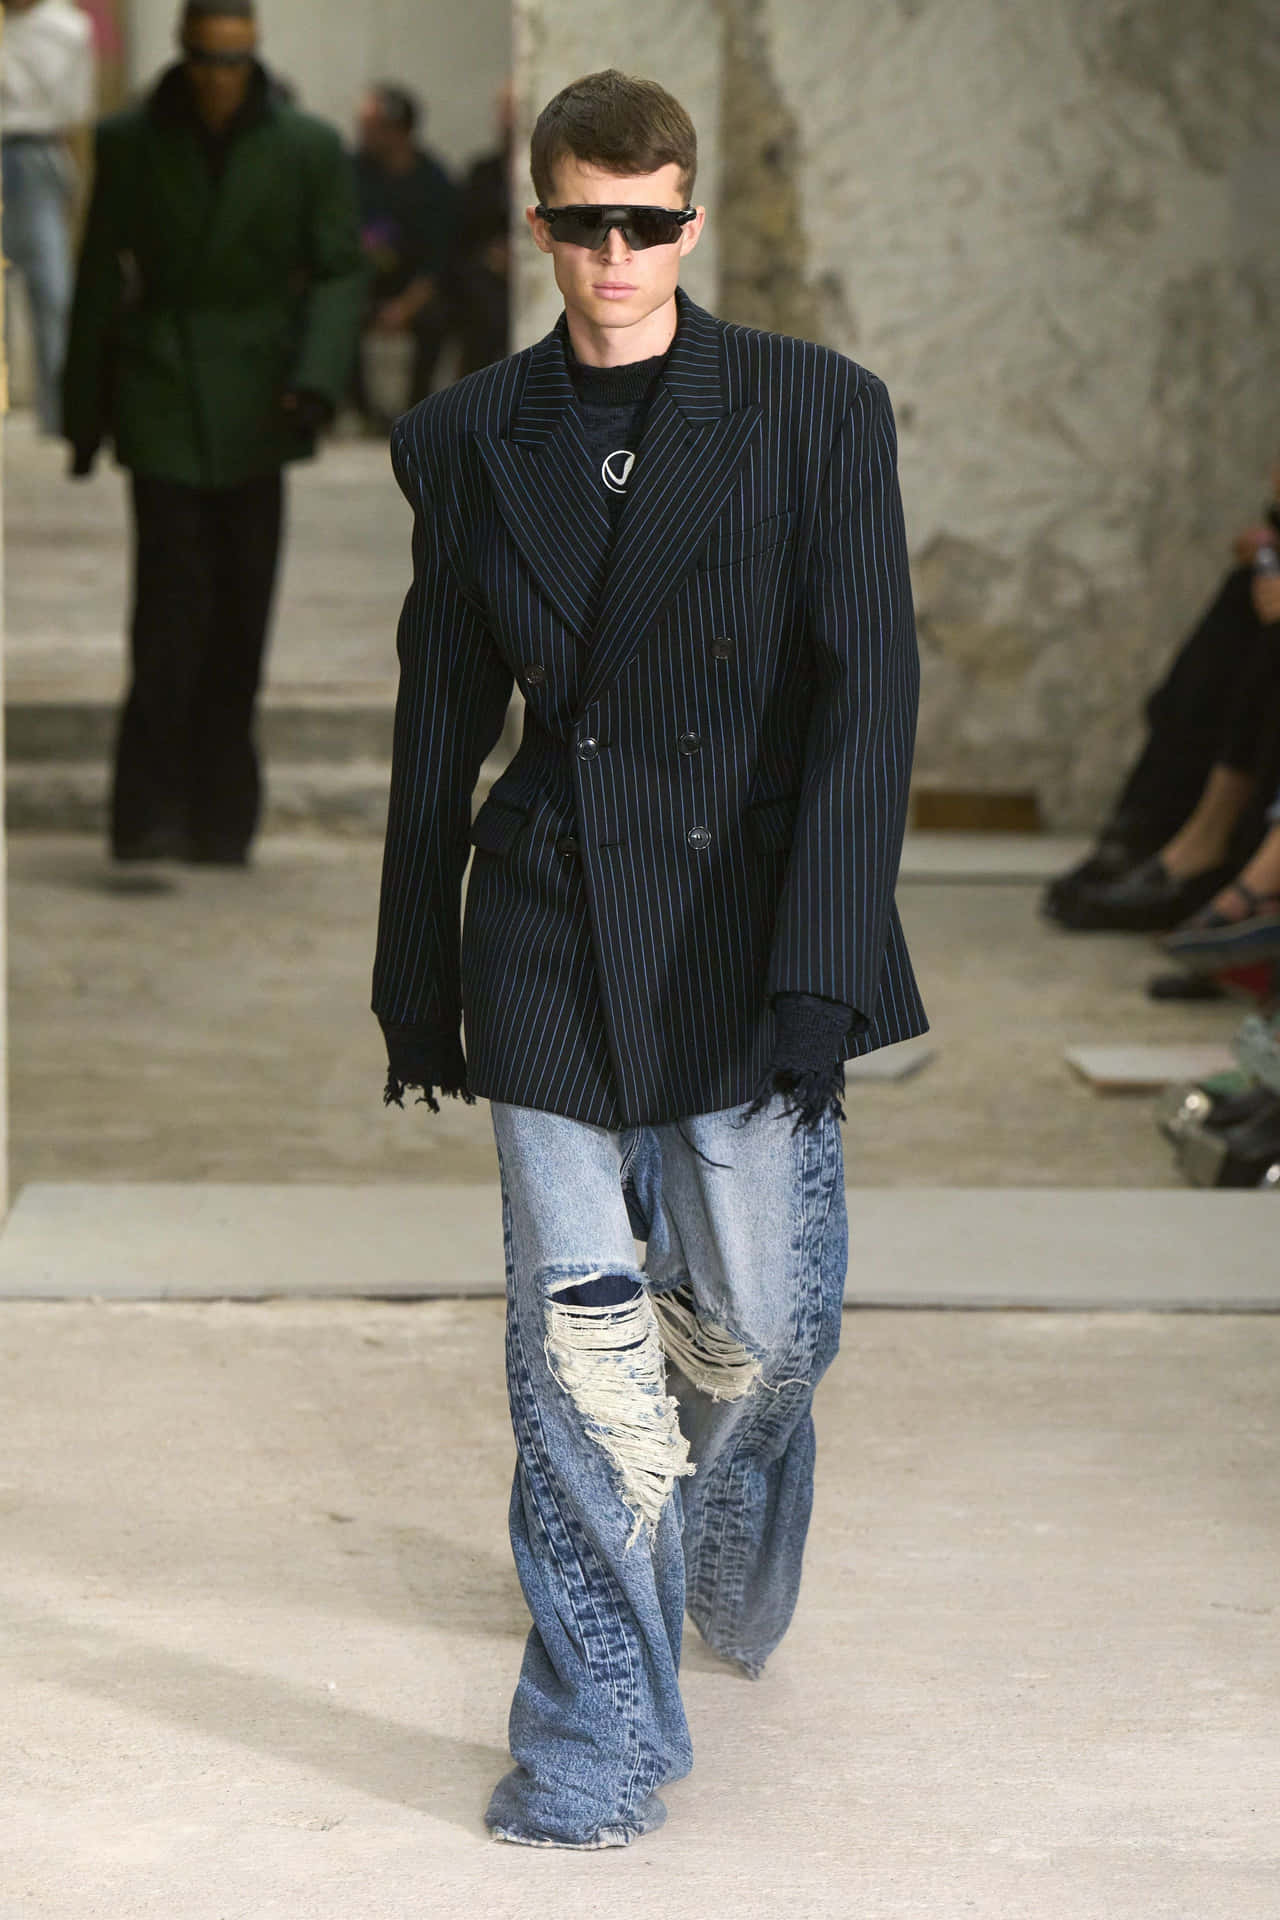 "Must-Have Styles From Vetements: The Masters of Avant-Garde".